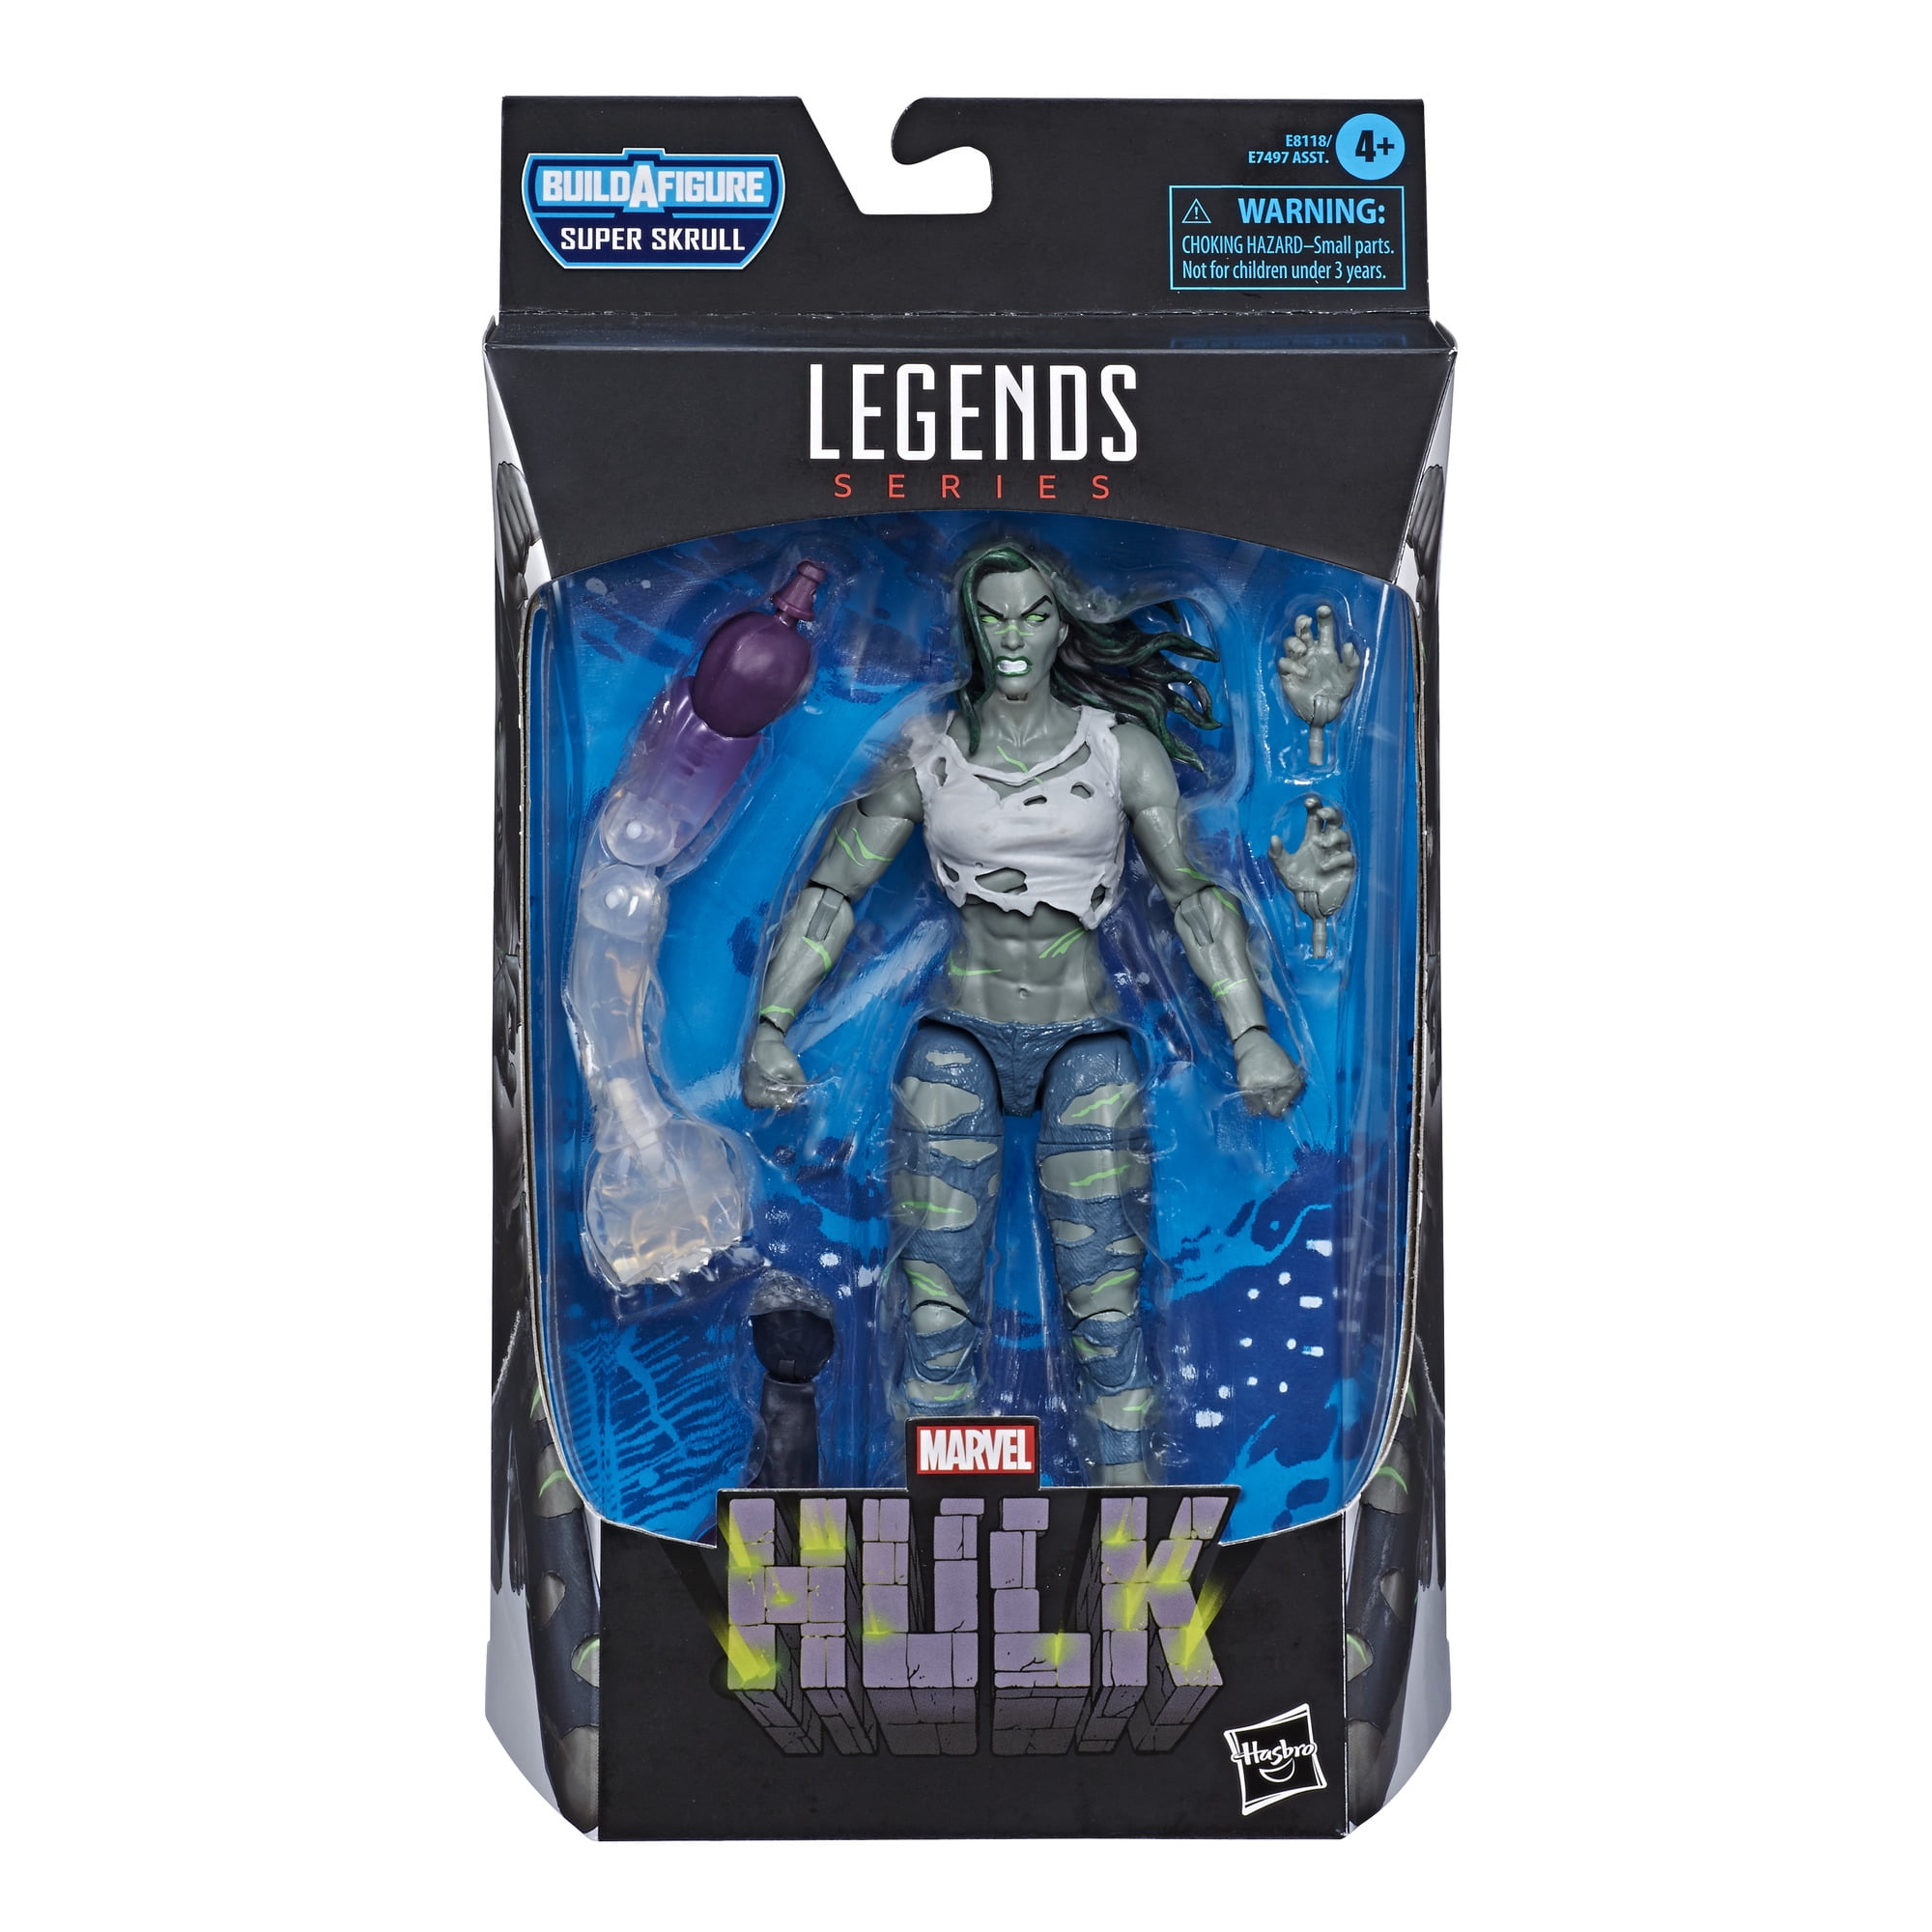 Hasbro Marvel Legends Series 6-inch Collectible Action Figure Hulk 